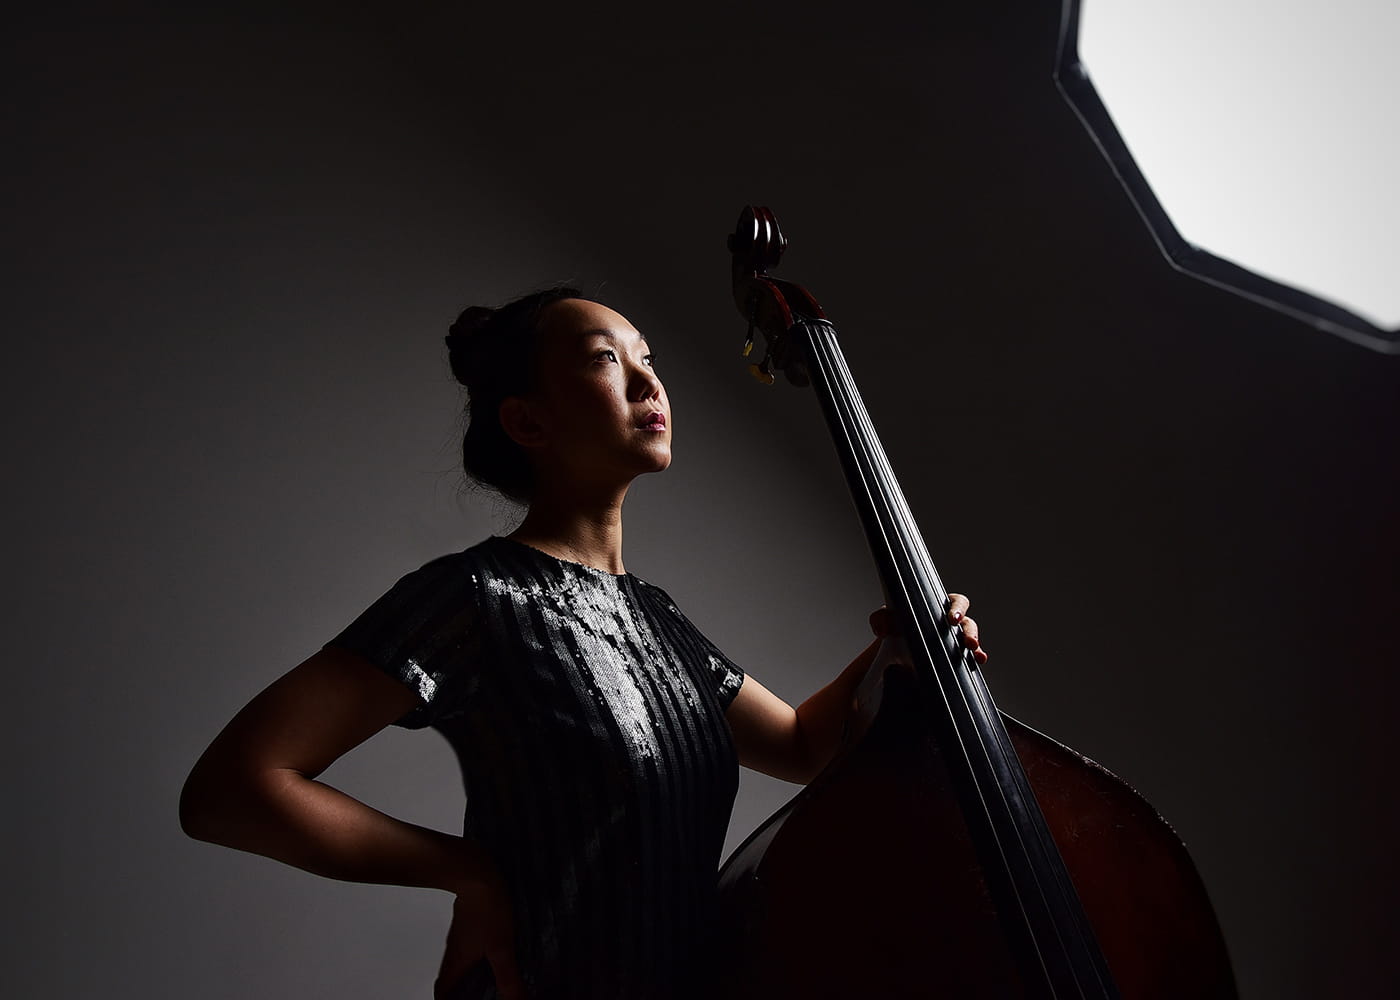 moody studio portrait from the side of Linda May Han Oh holding her double bass with a studio light over her head casting a harsh shadow